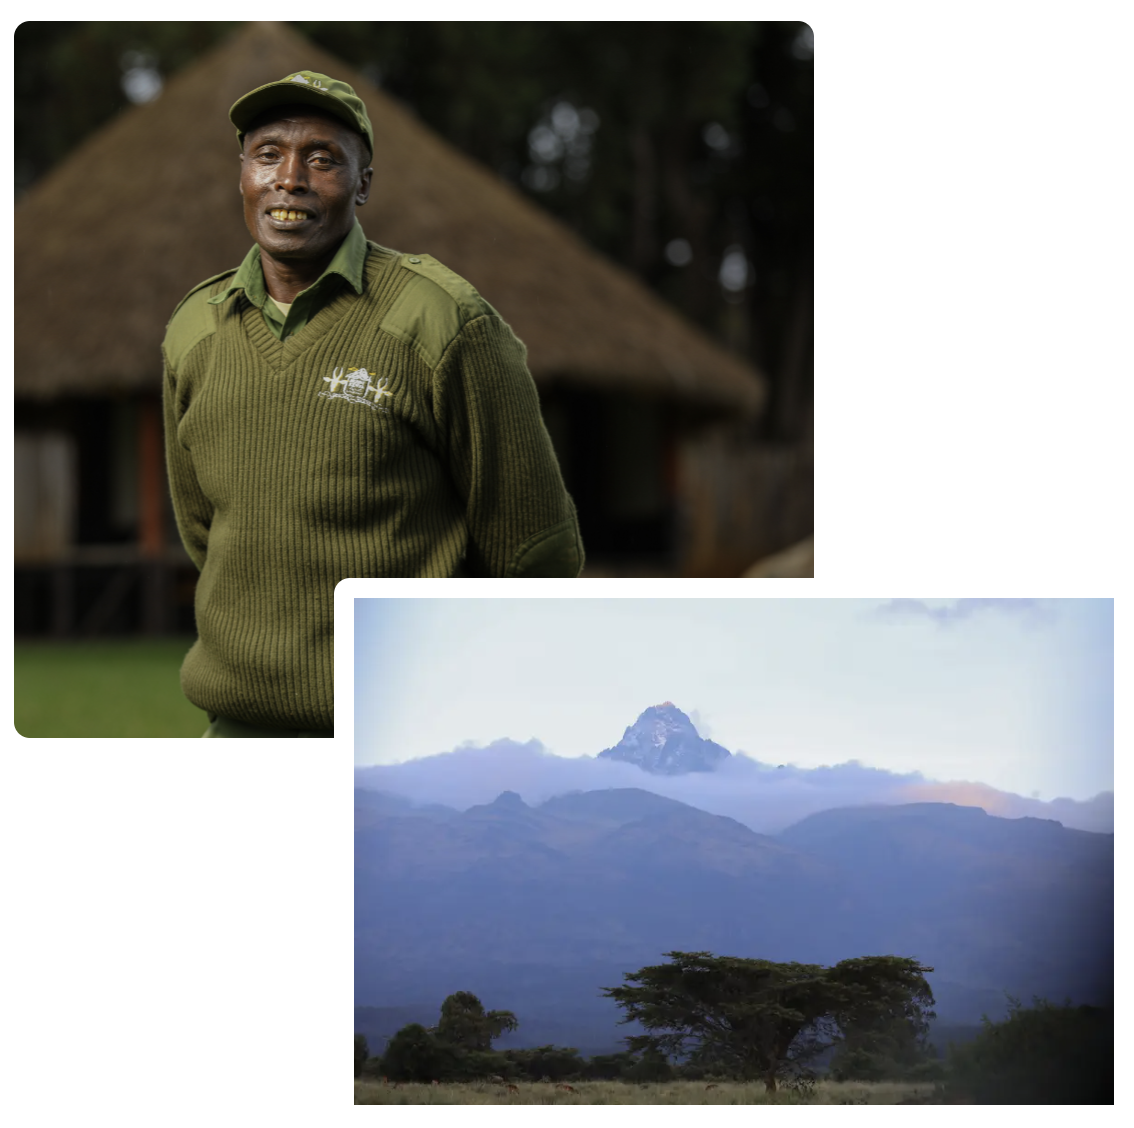 Mount Kenya Wildlife Conservancy (MKWC) is a non-profit trust dedicated to preserving the environment and the wildlife within.